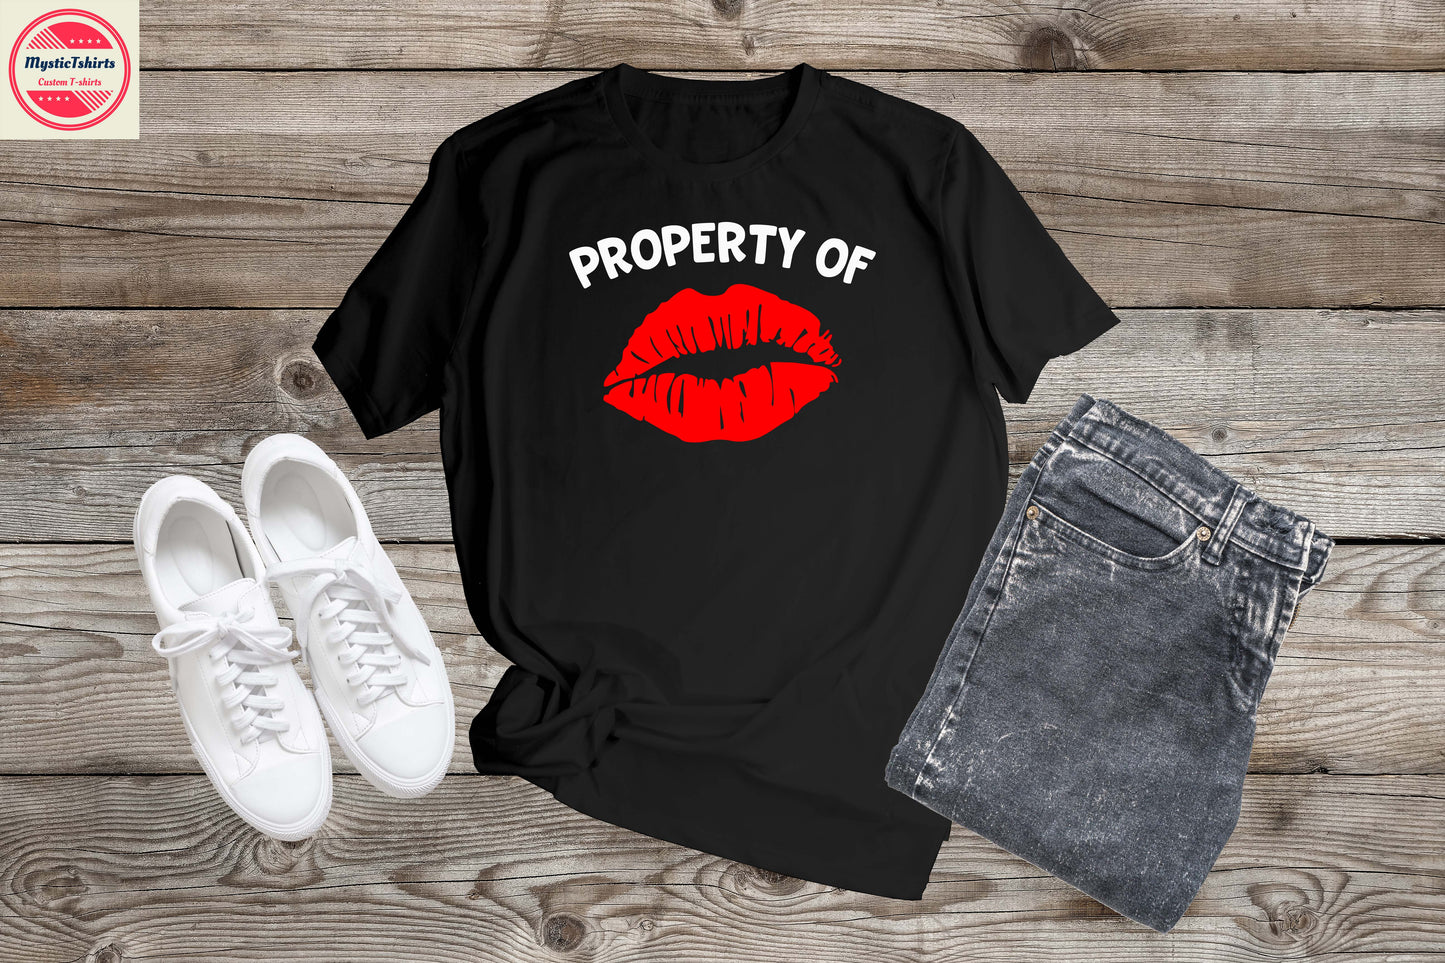 404. PROPERTY OF, Personalized T-Shirt, Custom Text, Make Your Own Shirt, Custom Tee